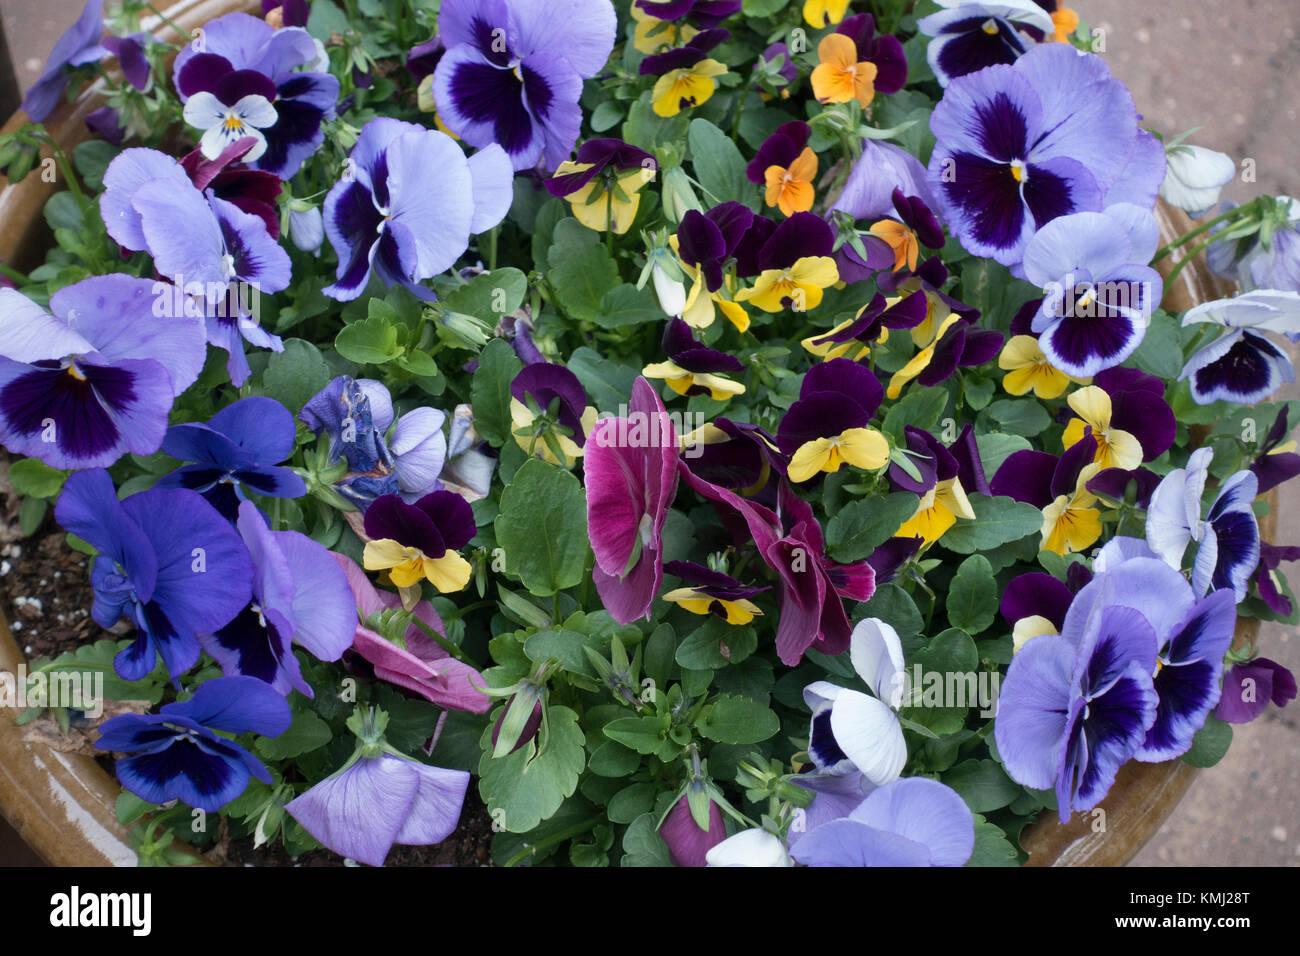 Flower pot chocked-full of blue, purple, violet and yellow pansies. St Paul Minnesota MN USA Stock Photo